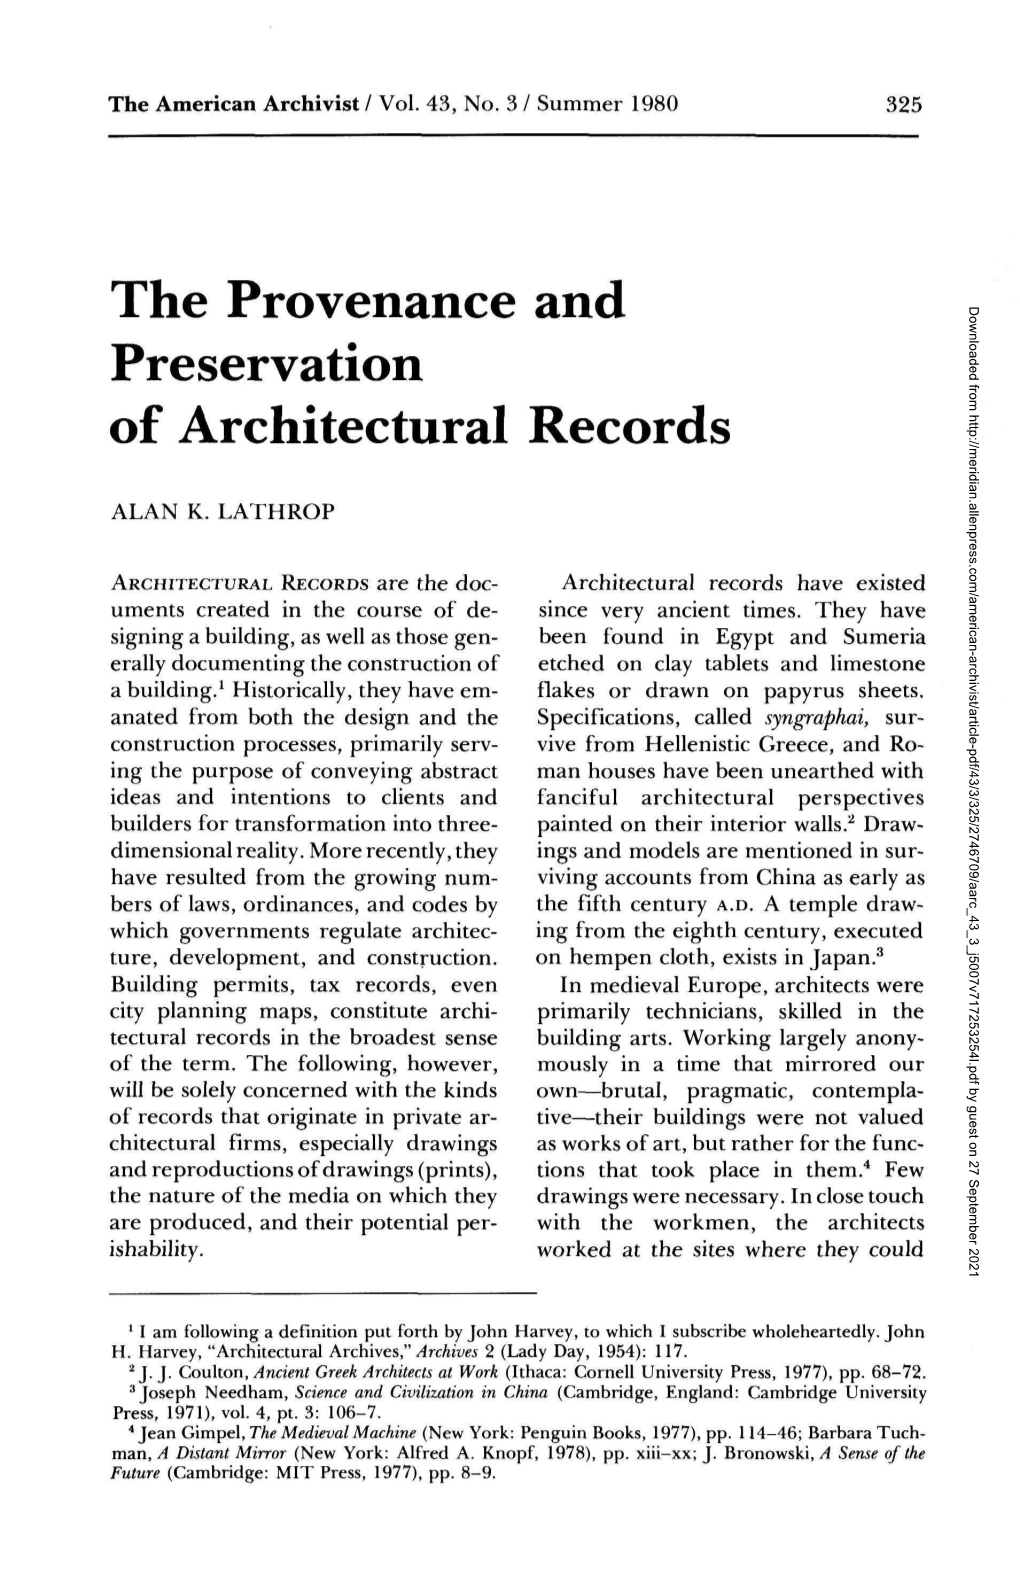 The Provenance and Preservation of Architectural Records